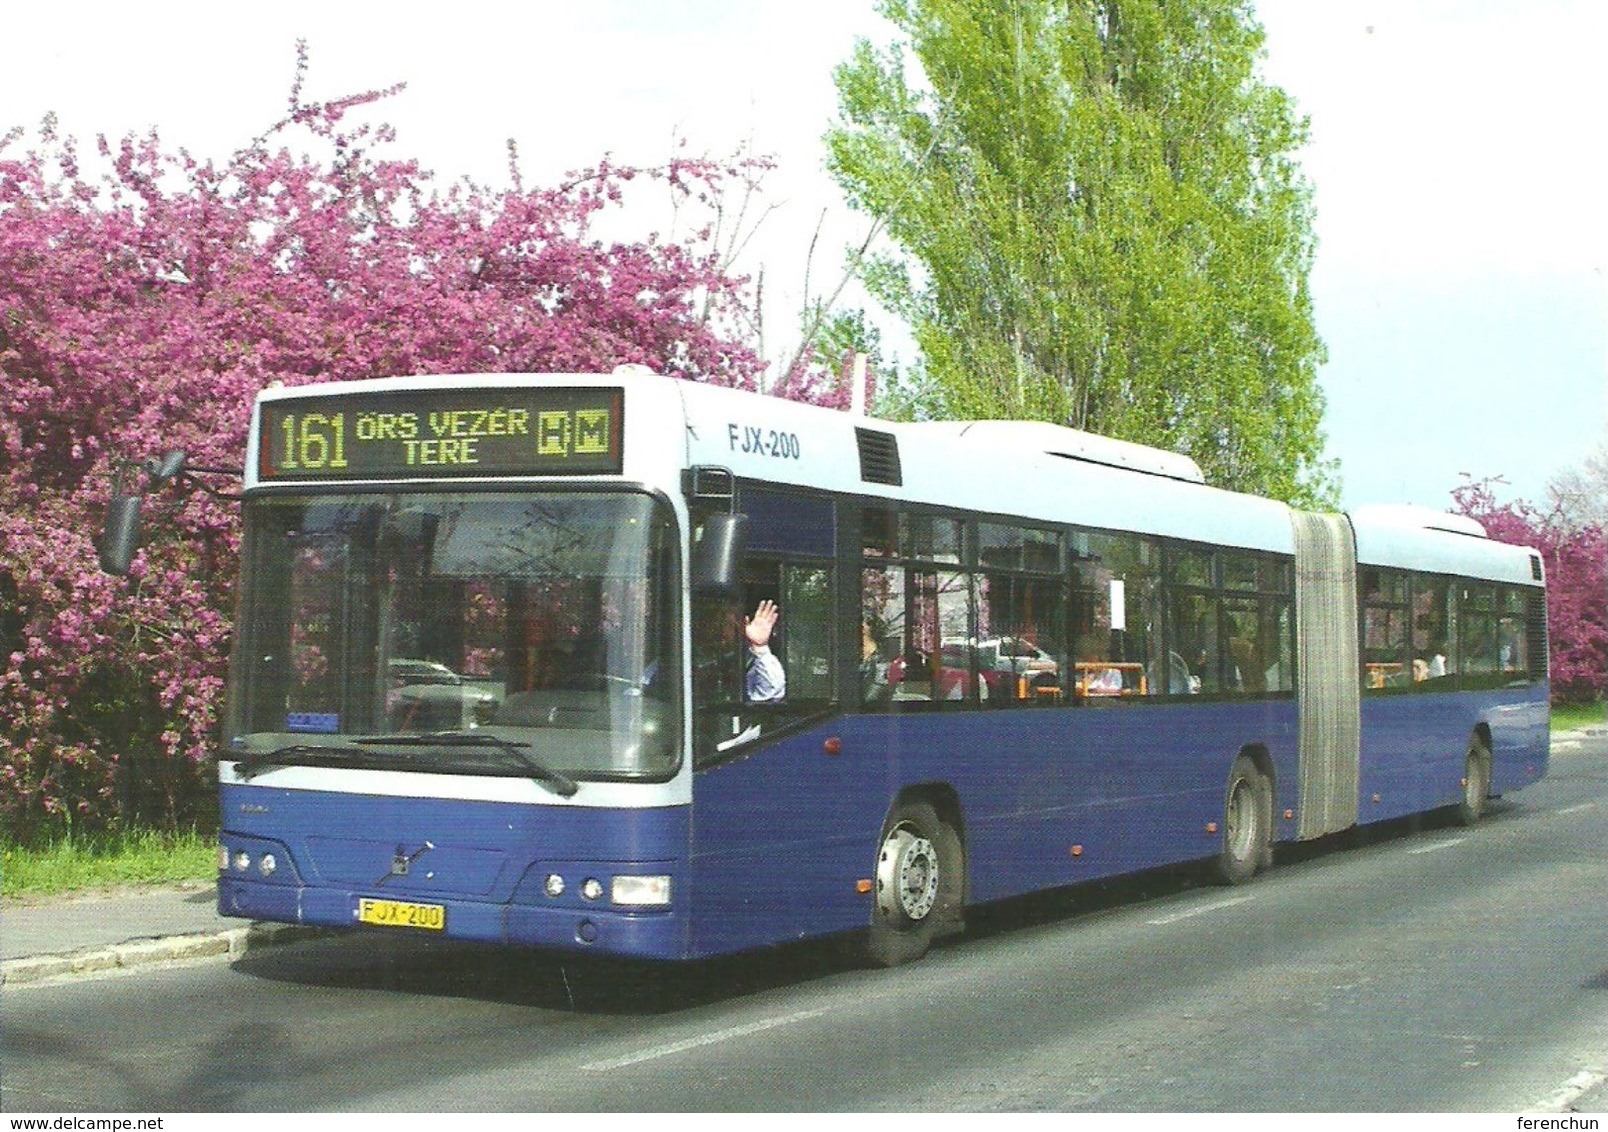 BUS * AUTOBUS * IKARUS 435 * BKV * BUDAPEST * FLOWER * PLANT * Top Card 0979 * Hungary - Buses & Coaches